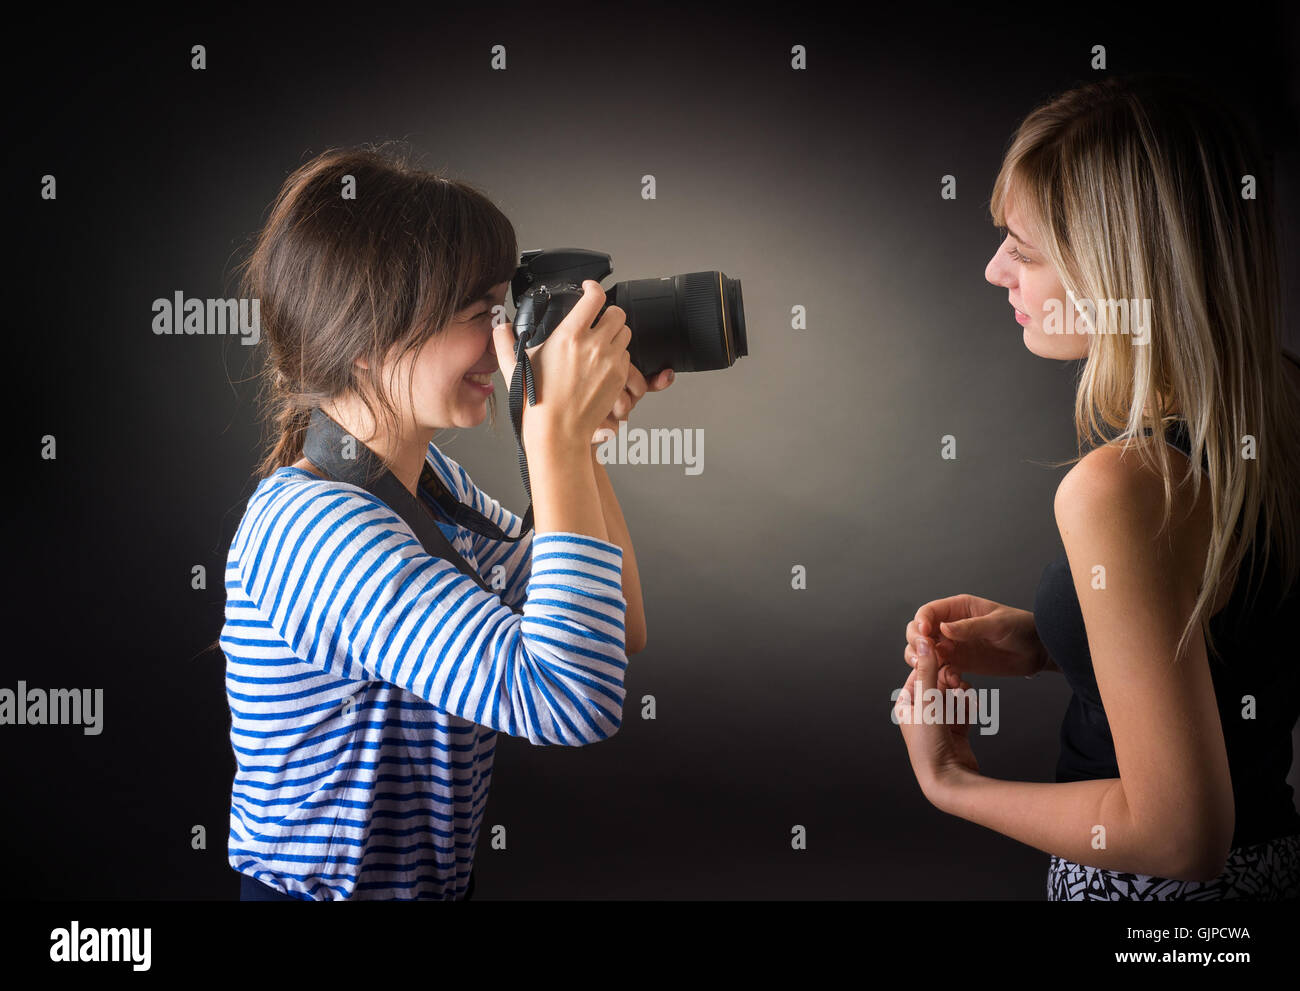 two girls are photographed in the studio Stock Photo